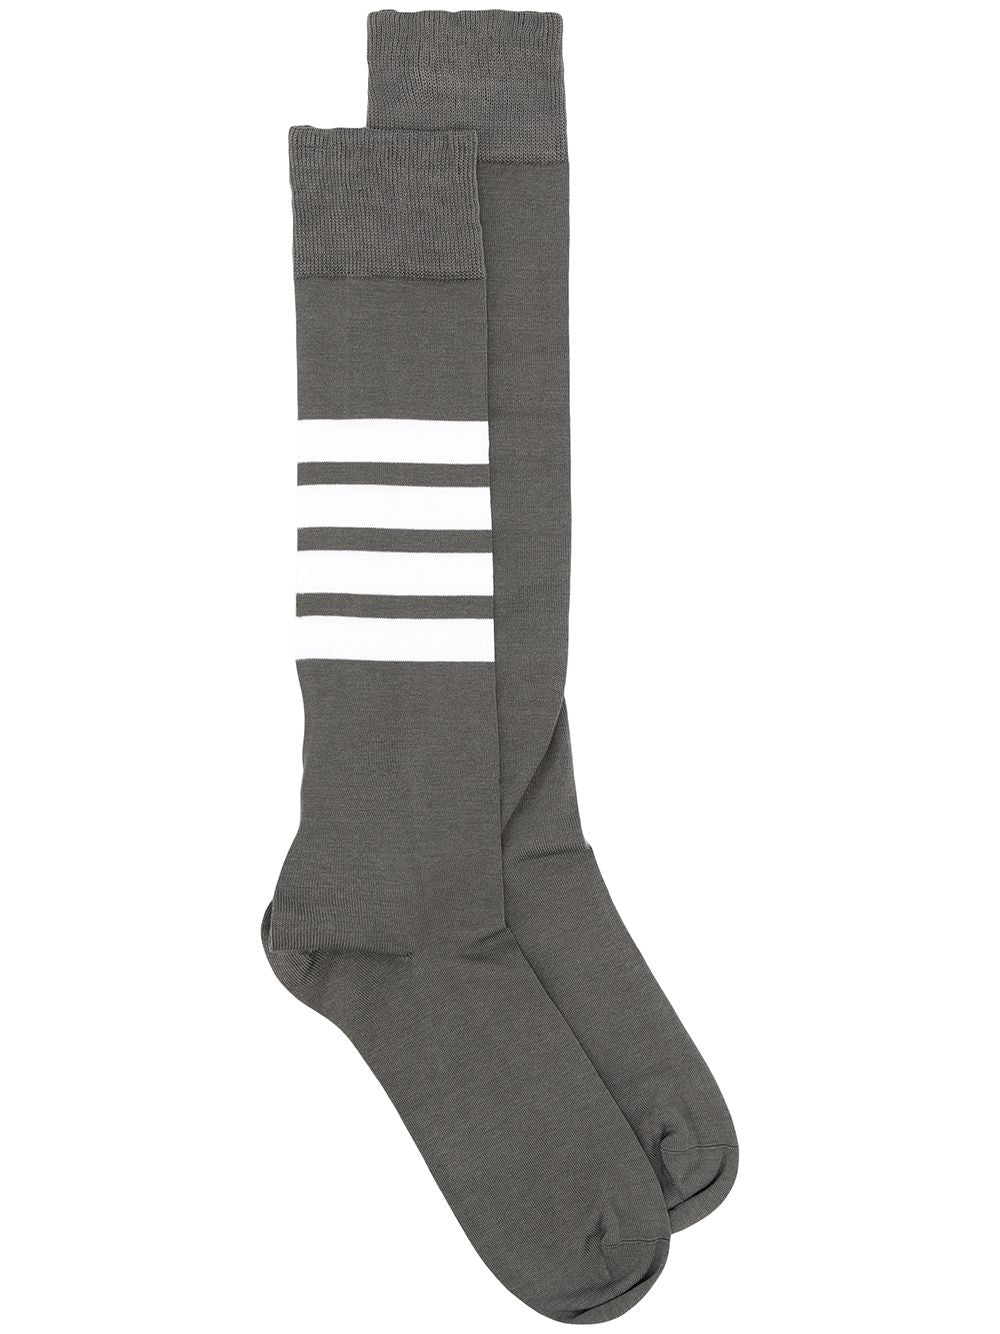 Over The Calf Socks W/ 4 Bar In Lightweight Cotton Med Grey